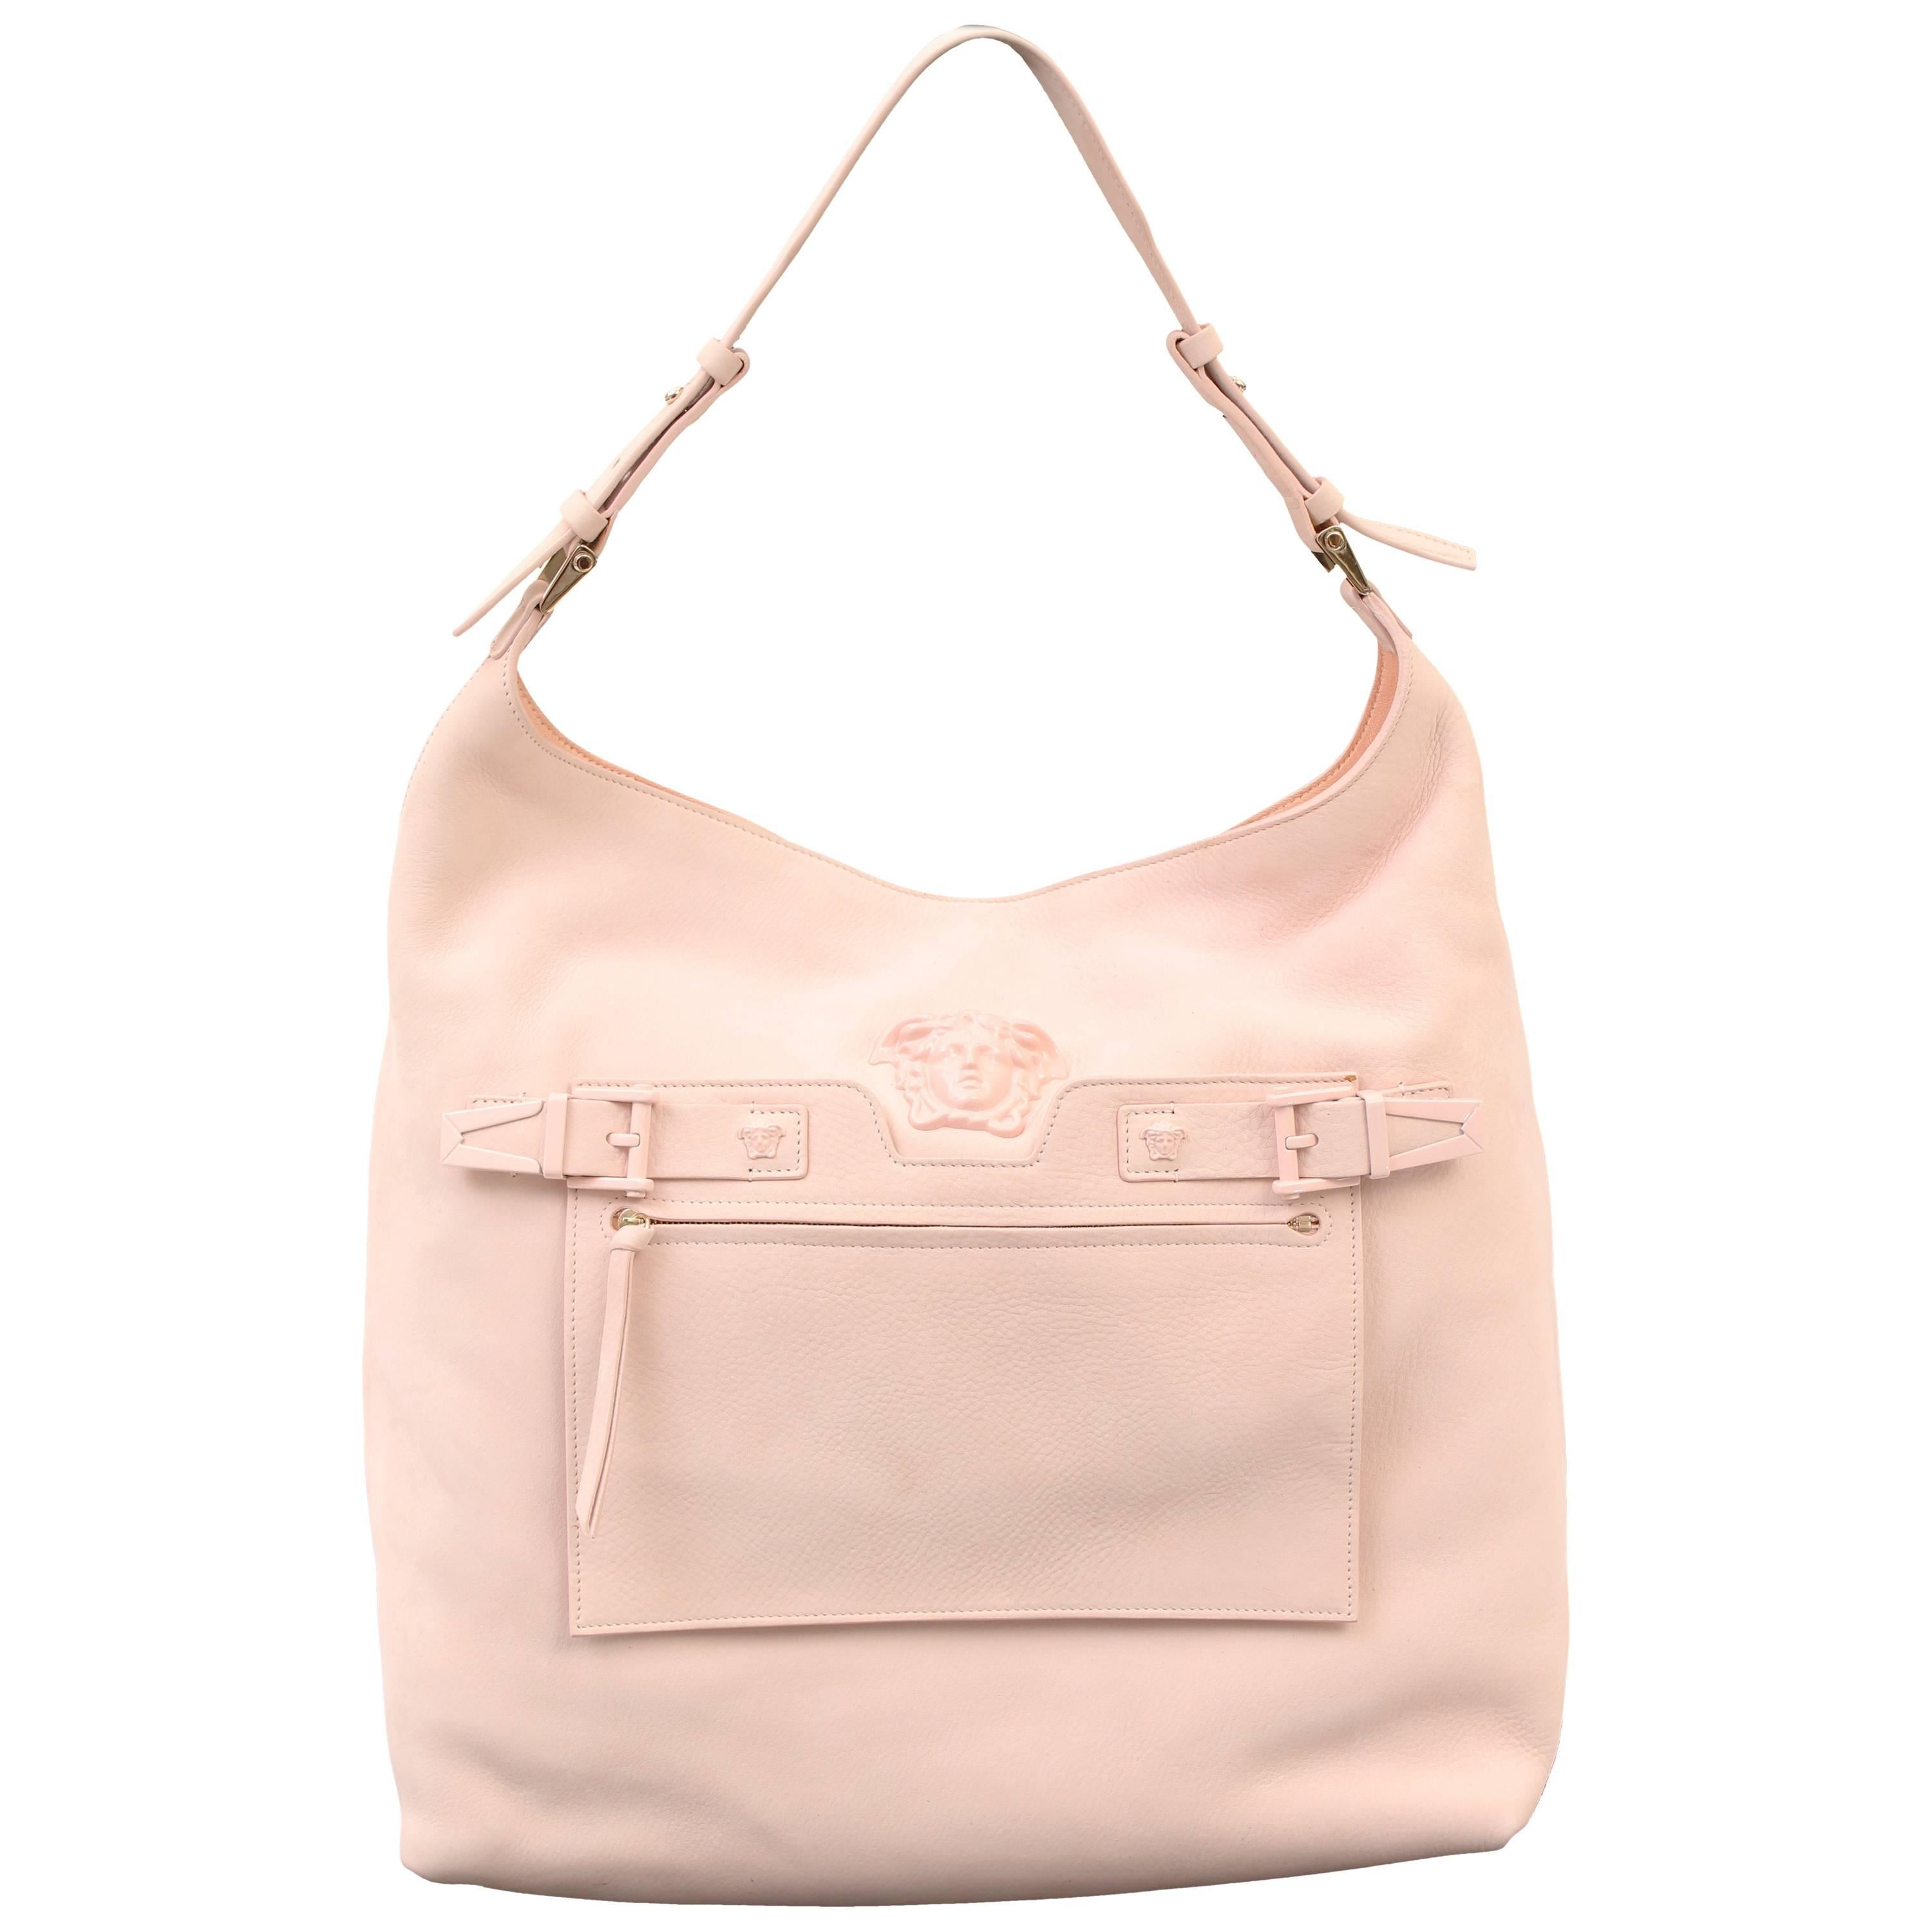 New VERSACE PALAZZO OVERSIZED SHOULDER BAG IN POWDER PINK DEER LEATHER For Sale